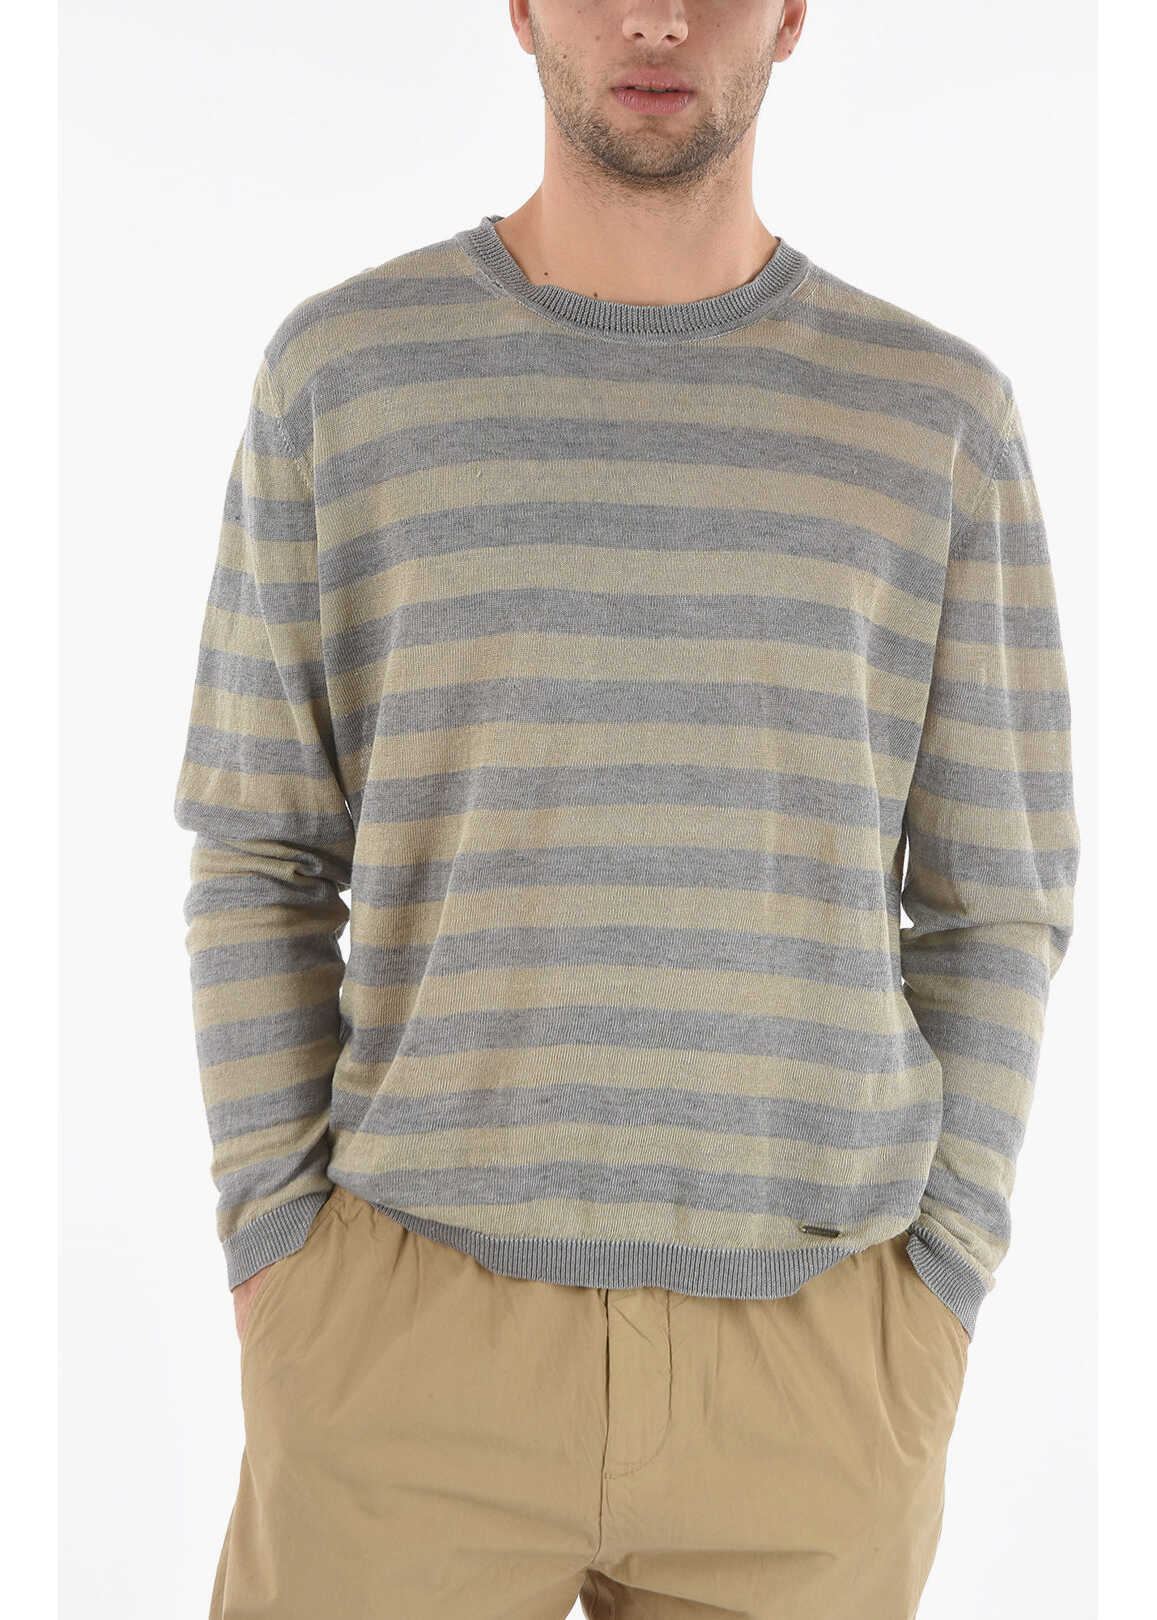 Woolrich Striped Two-Tone Flax Sweater Gray